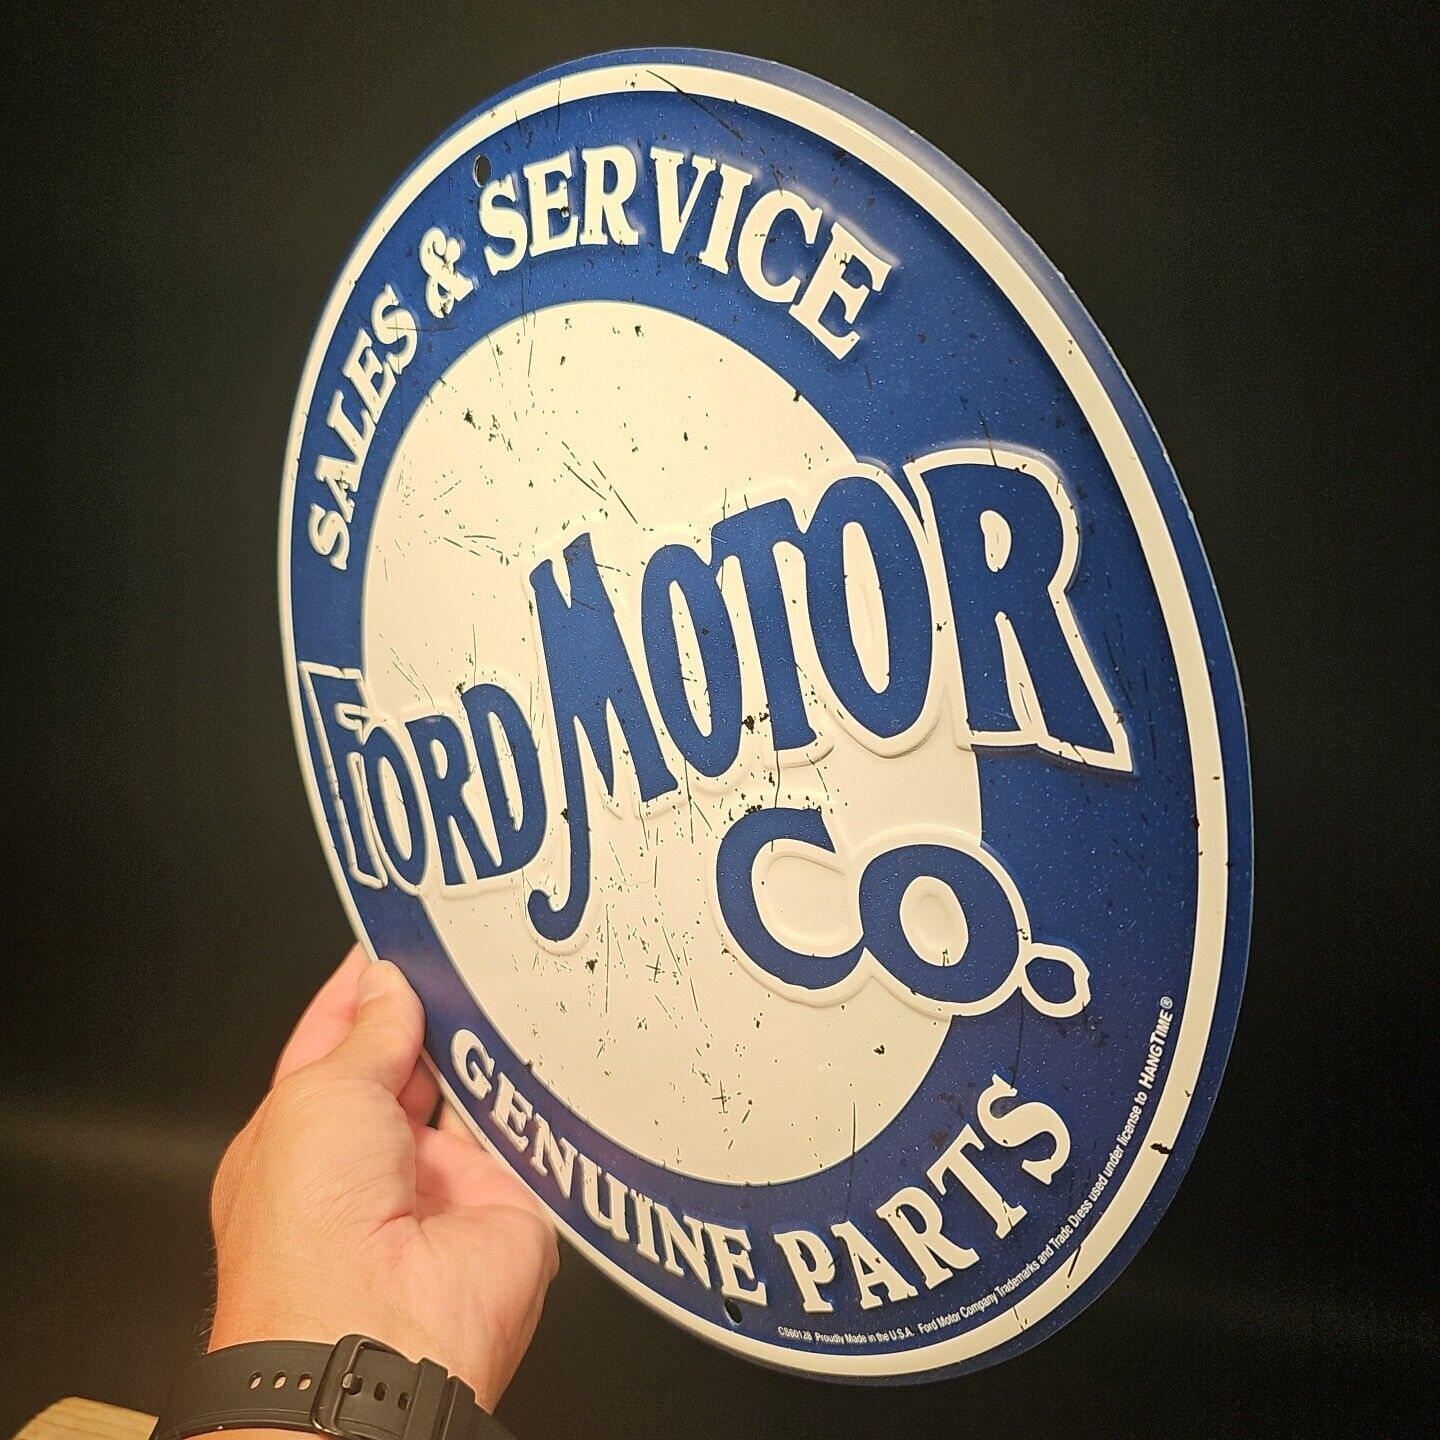 12" Antique Vintage Style Round Metal Ford Sign Plaque